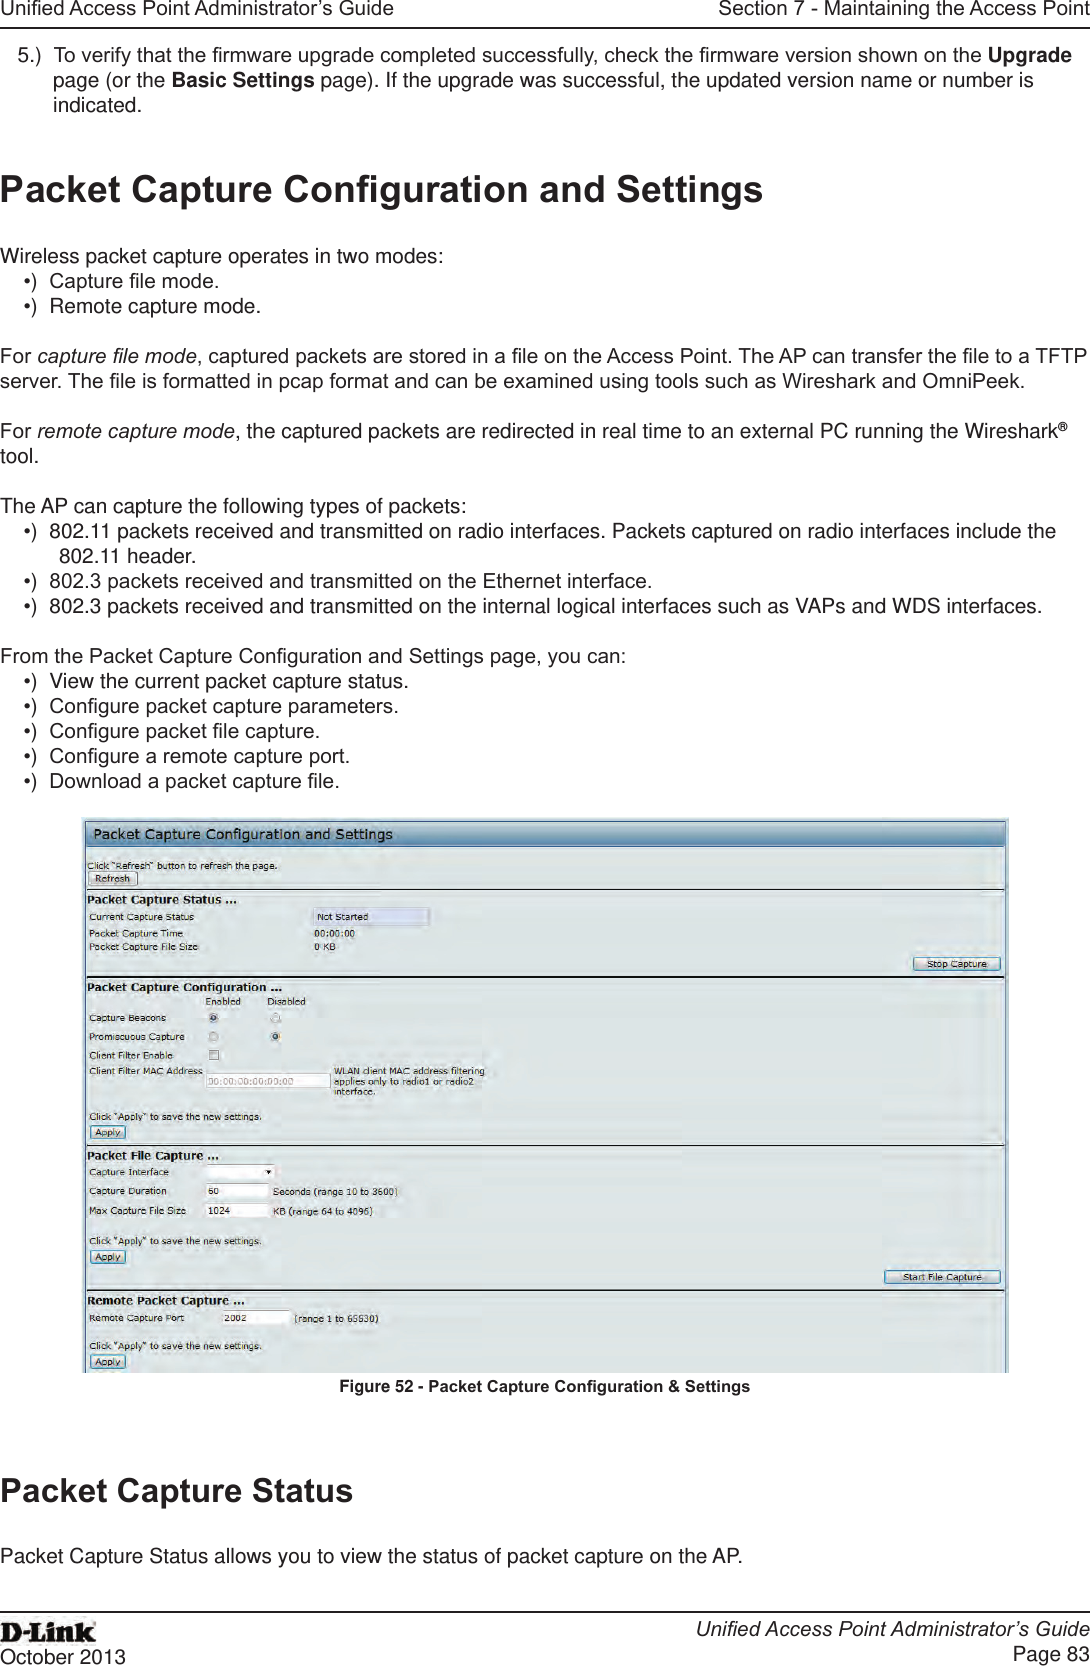 Unied Access Point Administrator’s GuideUnied Access Point Administrator’s GuidePage 83October 2013Section 7 - Maintaining the Access Point5.)  To verify that the rmware upgrade completed successfully, check the rmware version shown on the Upgrade page (or the Basic Settings page). If the upgrade was successful, the updated version name or number is indicated.Packet Capture Conguration and SettingsWireless packet capture operates in two modes:•)  Capture le mode.•)  Remote capture mode.For capture le mode, captured packets are stored in a le on the Access Point. The AP can transfer the le to a TFTP server. The le is formatted in pcap format and can be examined using tools such as Wireshark and OmniPeek.For remote capture mode, the captured packets are redirected in real time to an external PC running the Wireshark® tool.The AP can capture the following types of packets:•)  802.11 packets received and transmitted on radio interfaces. Packets captured on radio interfaces include the 802.11 header.•)  802.3 packets received and transmitted on the Ethernet interface.•)  802.3 packets received and transmitted on the internal logical interfaces such as VAPs and WDS interfaces.From the Packet Capture Conguration and Settings page, you can:•)  View the current packet capture status.•)  Congure packet capture parameters.•)  Congure packet le capture.•)  Congure a remote capture port.•)  Download a packet capture le.Figure 52 - Packet Capture Conguration &amp; SettingsPacket Capture StatusPacket Capture Status allows you to view the status of packet capture on the AP.